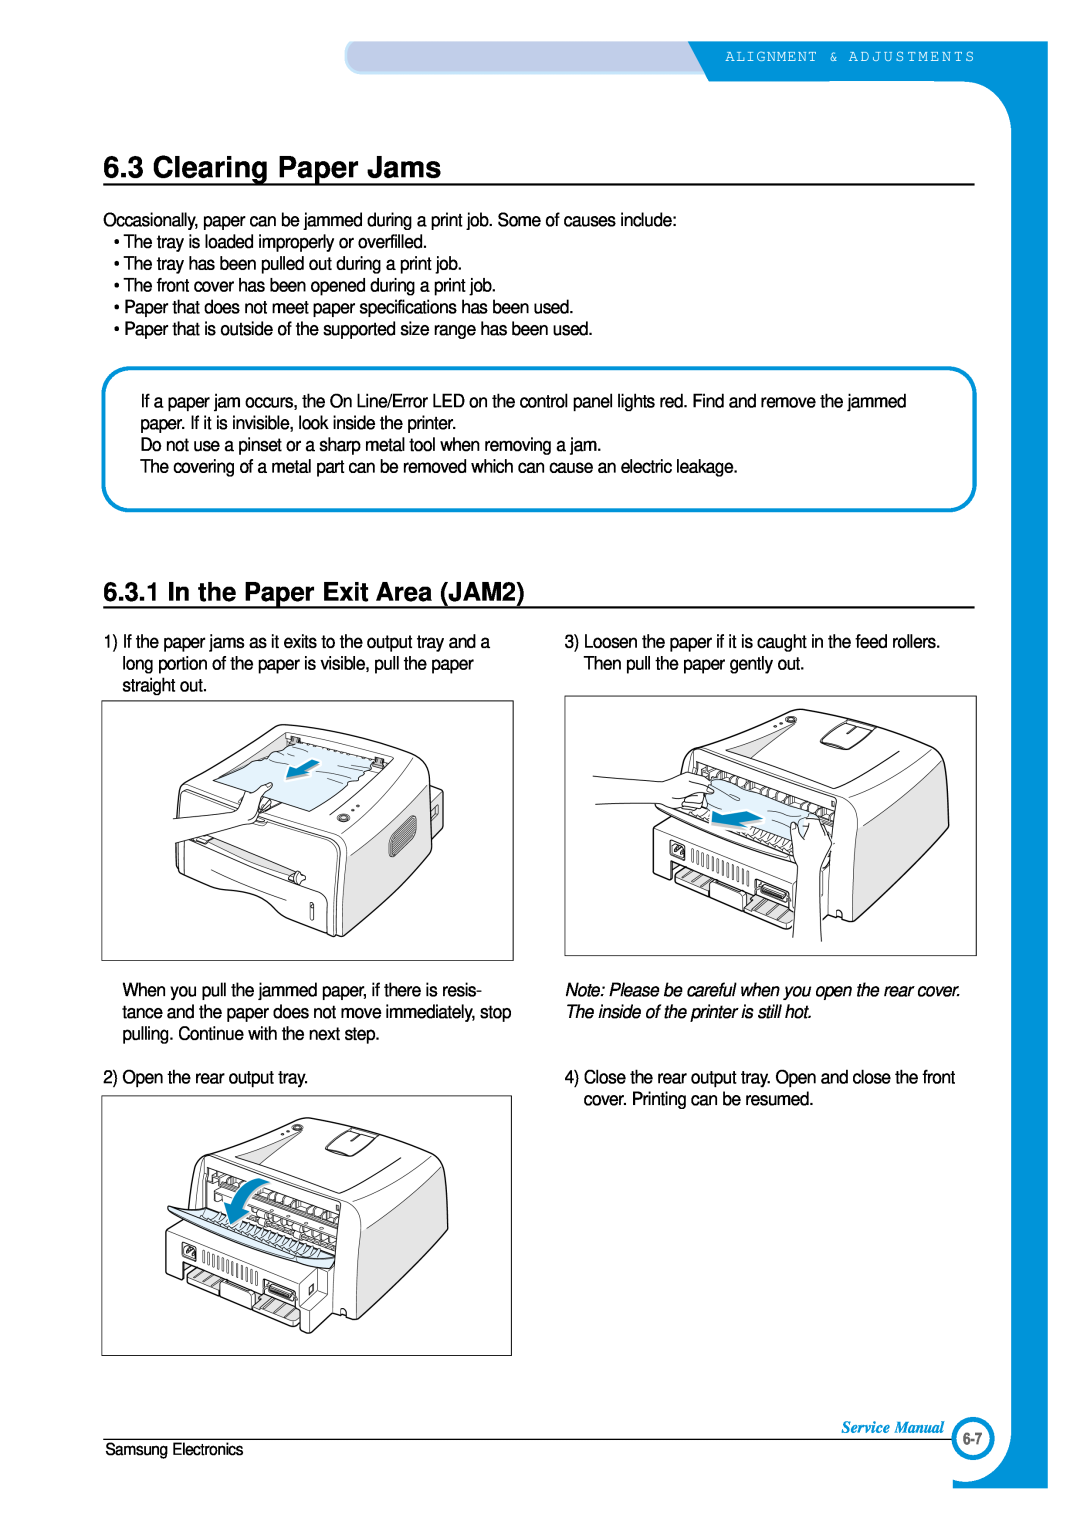 Samsung ML-1700 specifications Clearing Paper Jams, In the Paper Exit Area JAM2 